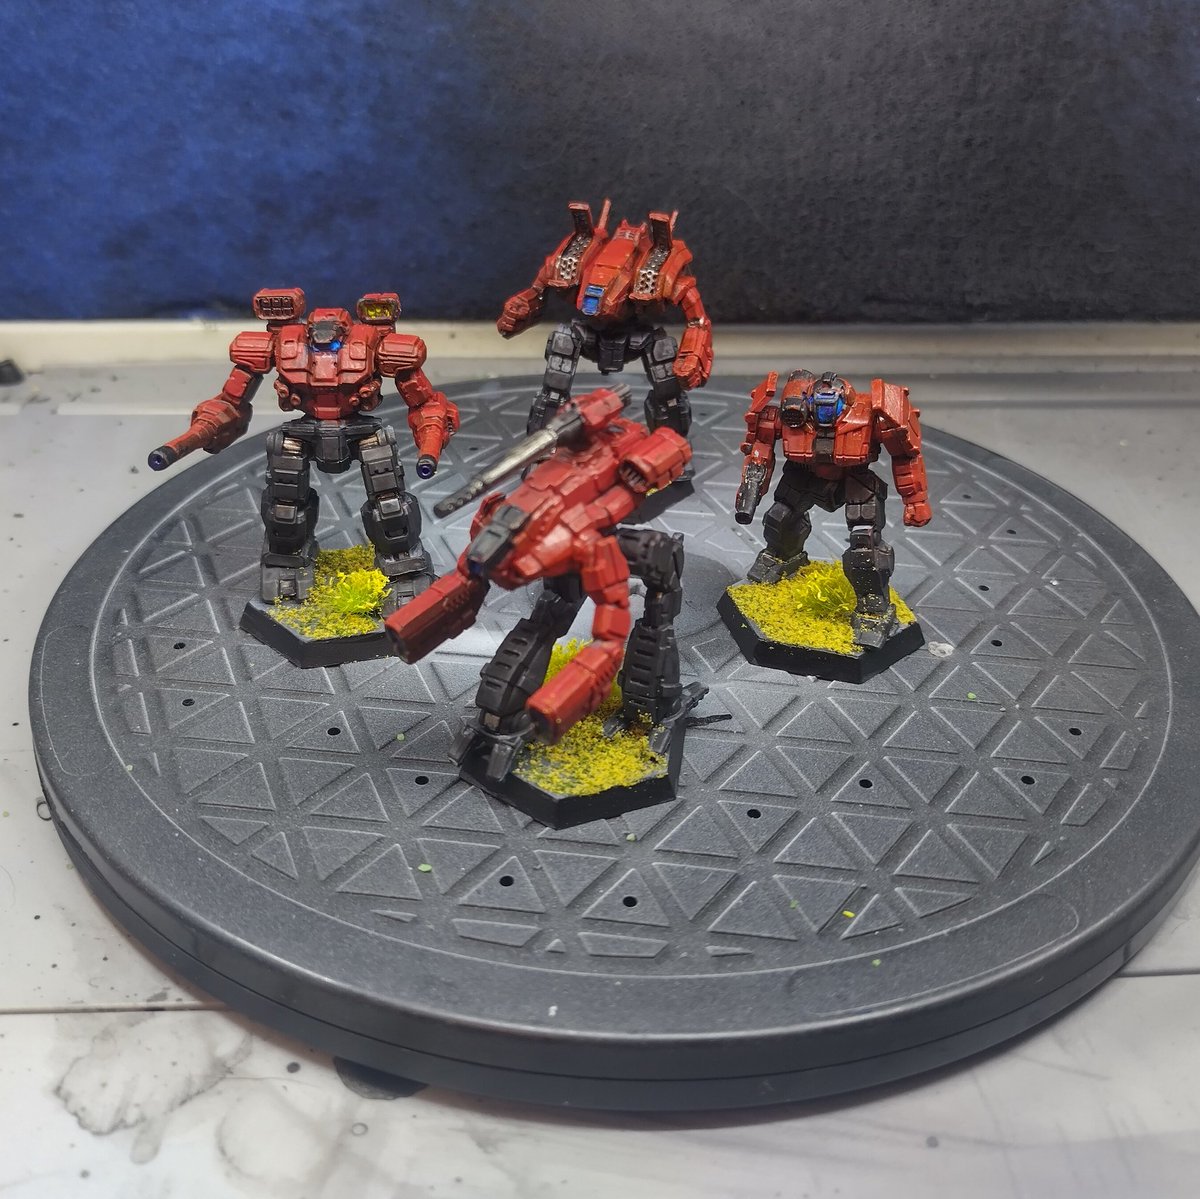 The Red Hunters are ready to crush those rebellious fools. 
#battletech #battletechminiatures #catalystgamelabs #citadelcontrast #armypainter #miniaturepainting #warmongers